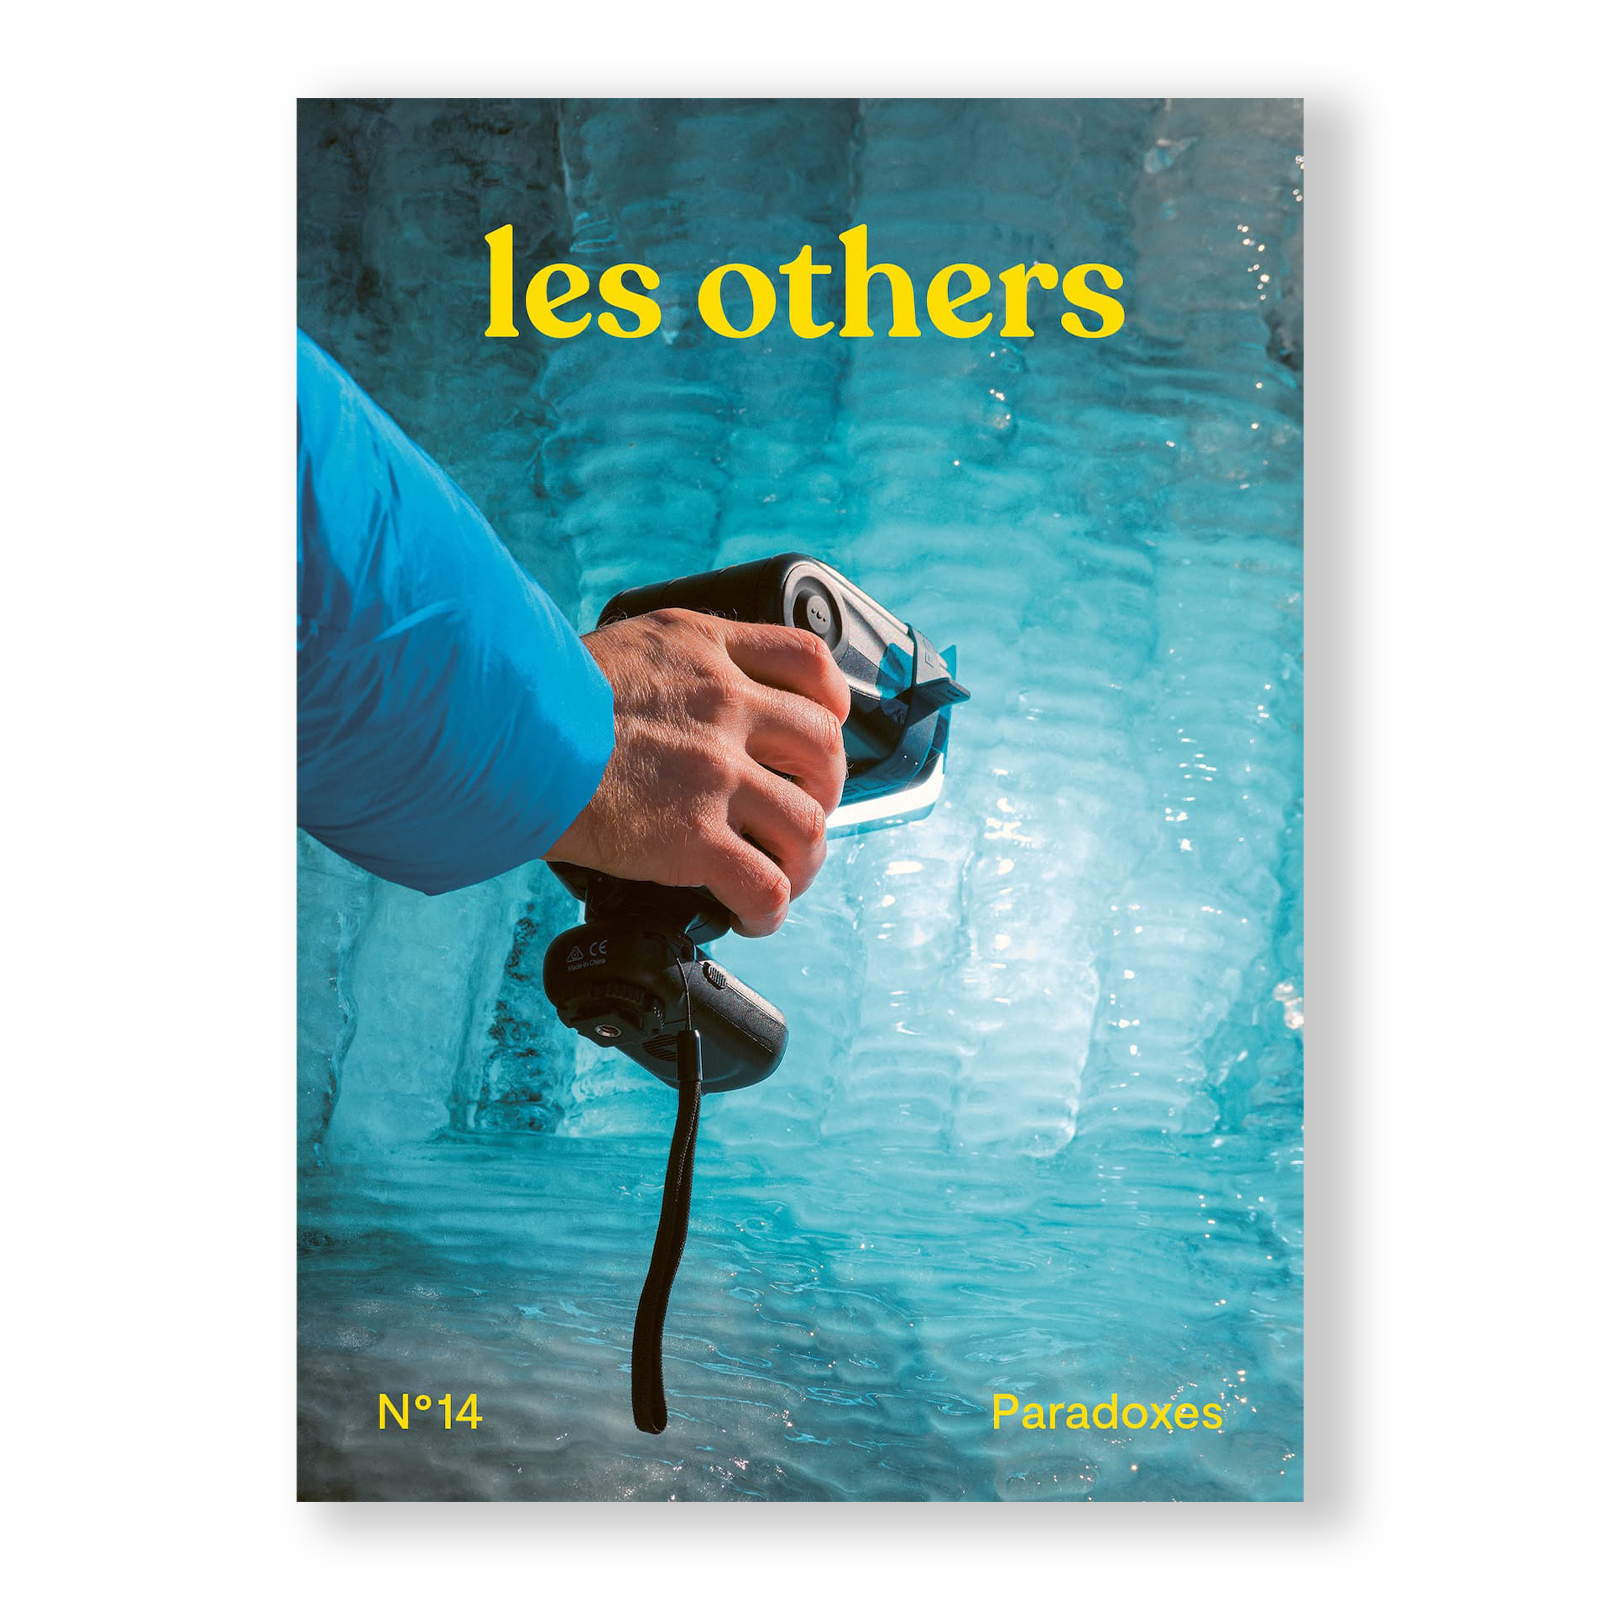 les others - Paradoxes (volume 14)